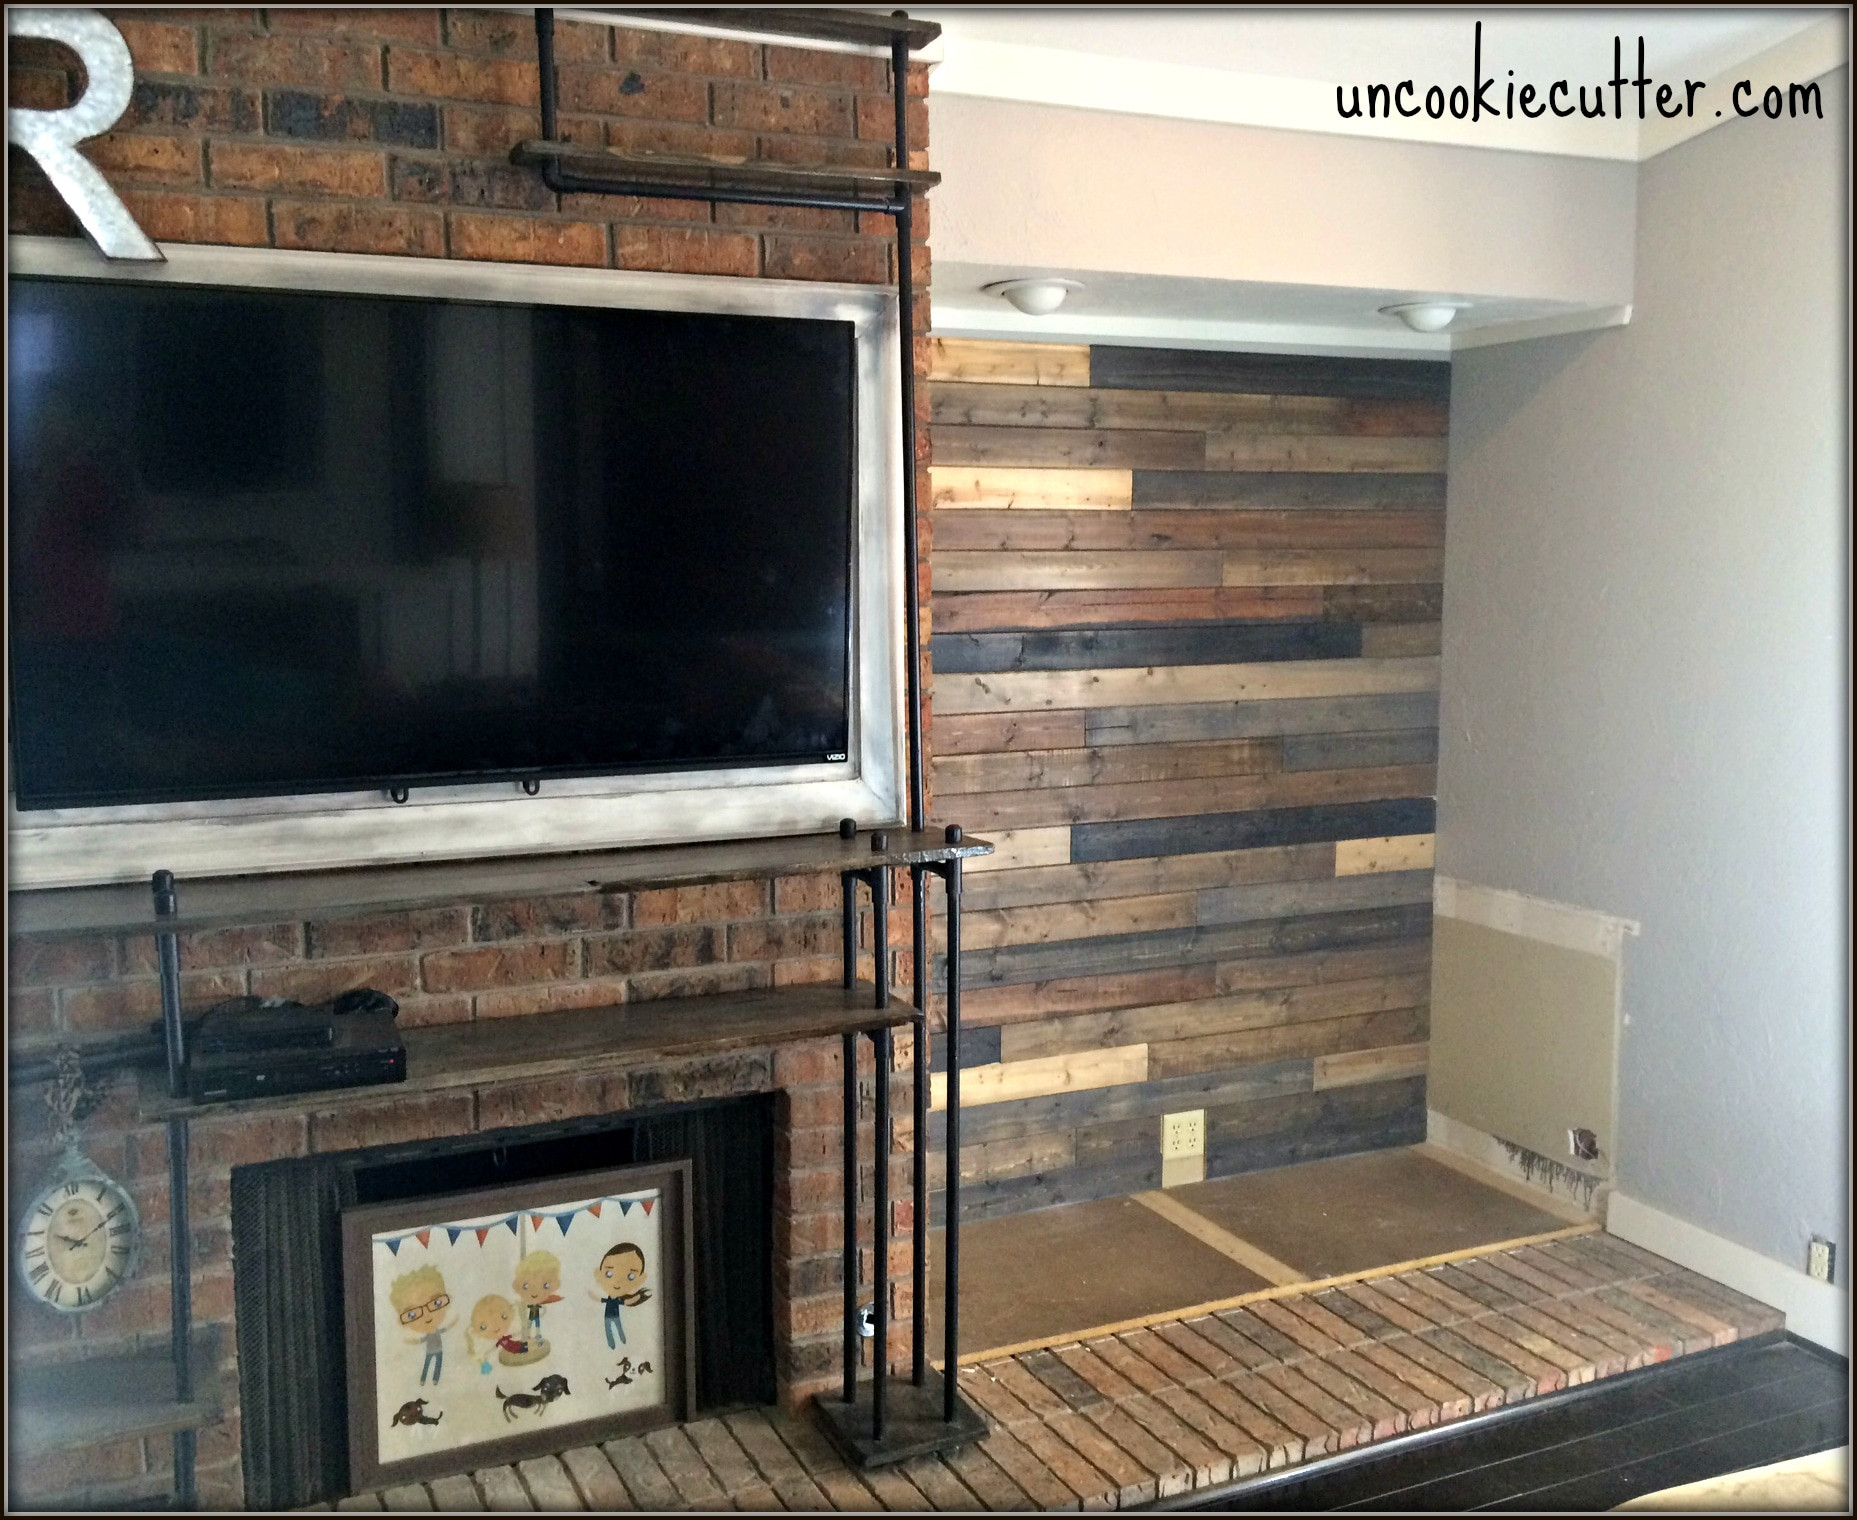 DIY Wood Paneling Walls
 Mixed Wood Wall Easy & Cheap DIY Uncookie Cutter